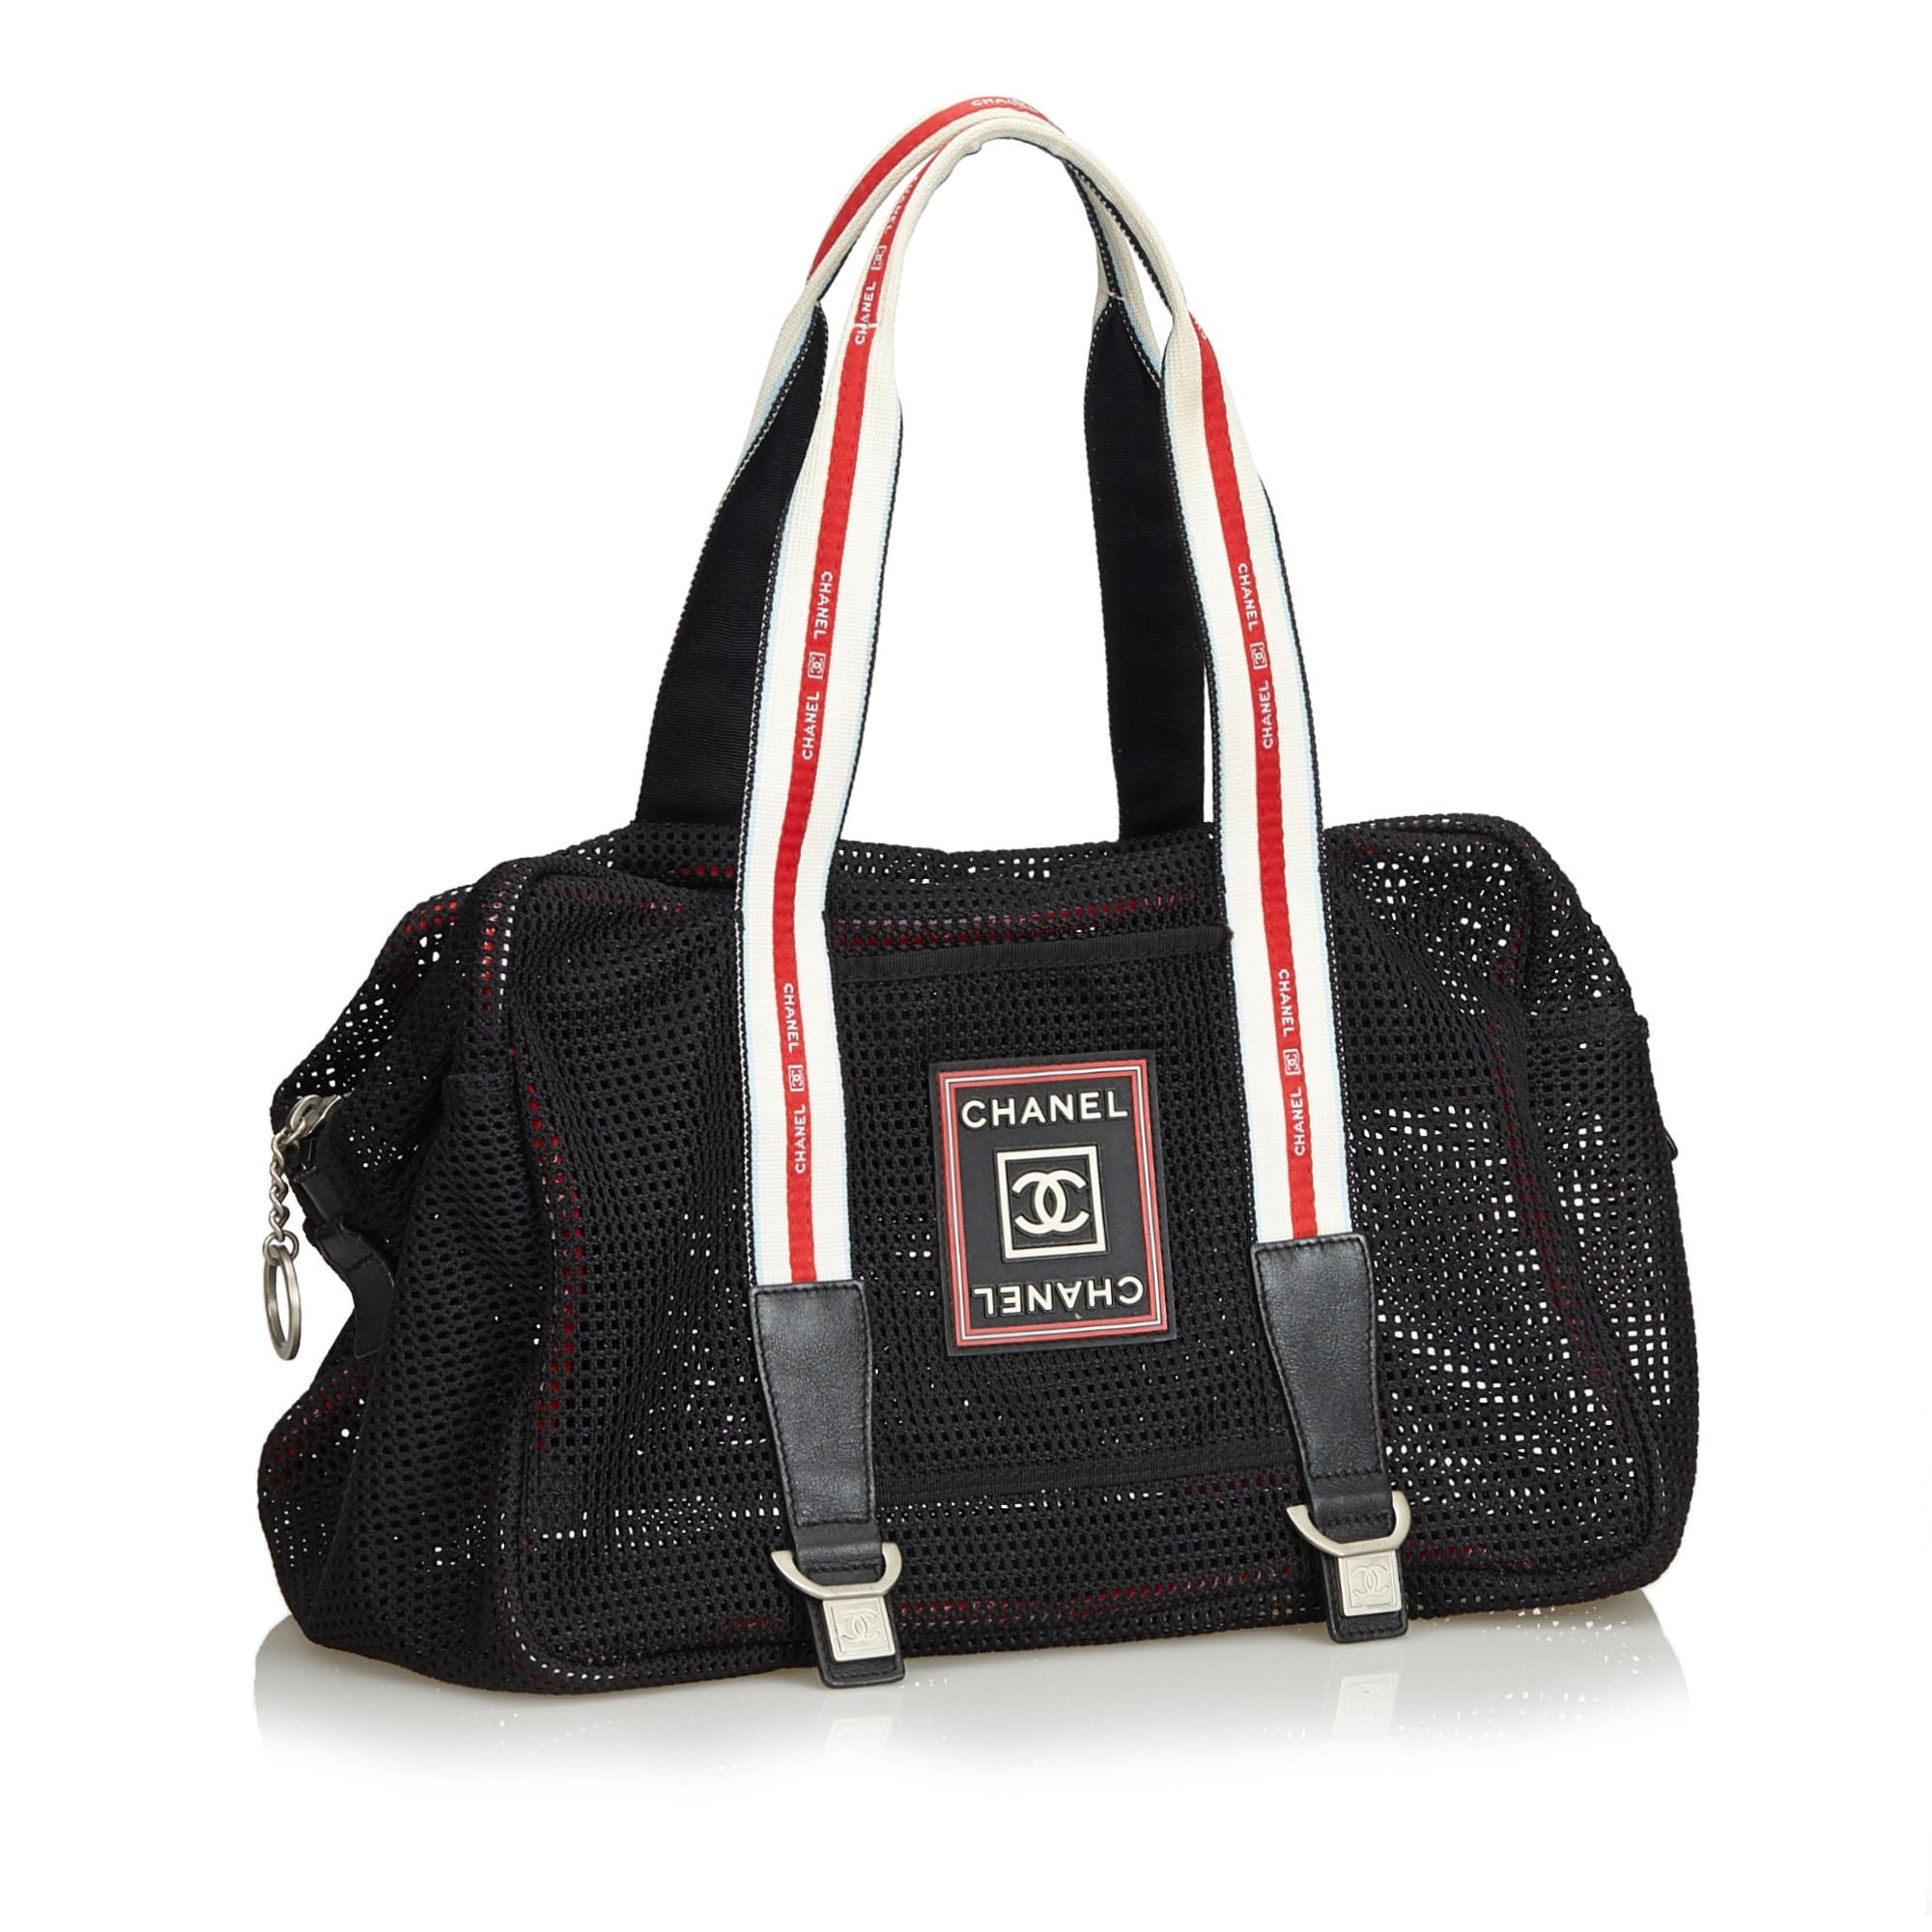 This sporty Chanel shoulder bag features a black chemical fiber body with leather trim, front exterior slip pocket, striped flat shoulder straps, top zip closure, and interior zip pocket, which Chanel logo plaque on front. Comes with dust bag.